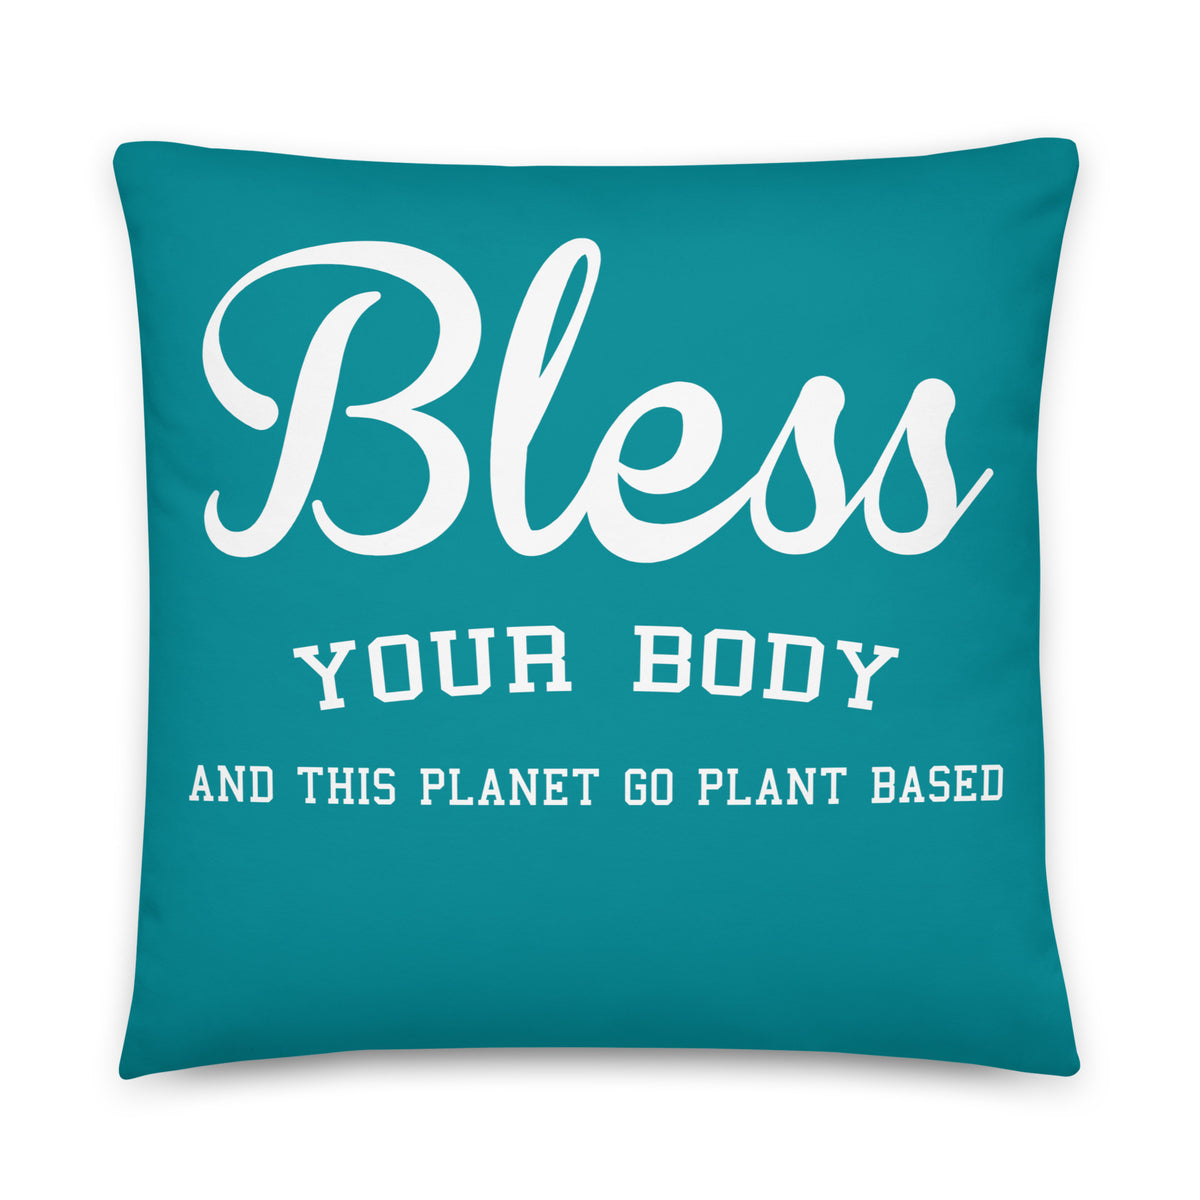 BLESS YOUR BODY Cushion